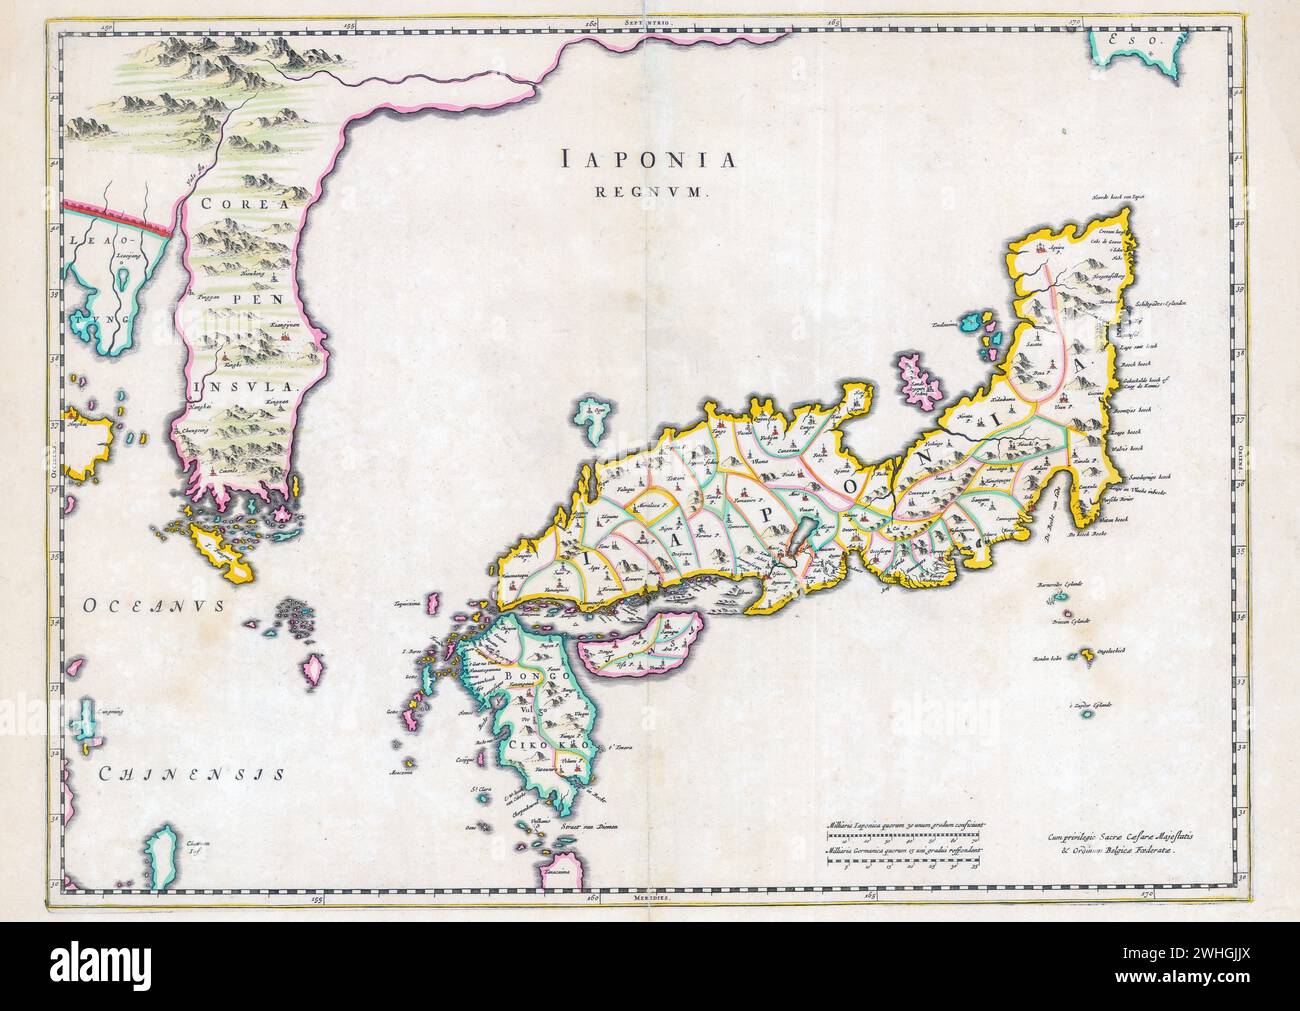 Old map of imperial Japan Willem and Johannes Joan Blaeu, ca 1655 *** Old map of imperial Japan Willem and Johannes Joan Blaeu, ca 1655 Stock Photo